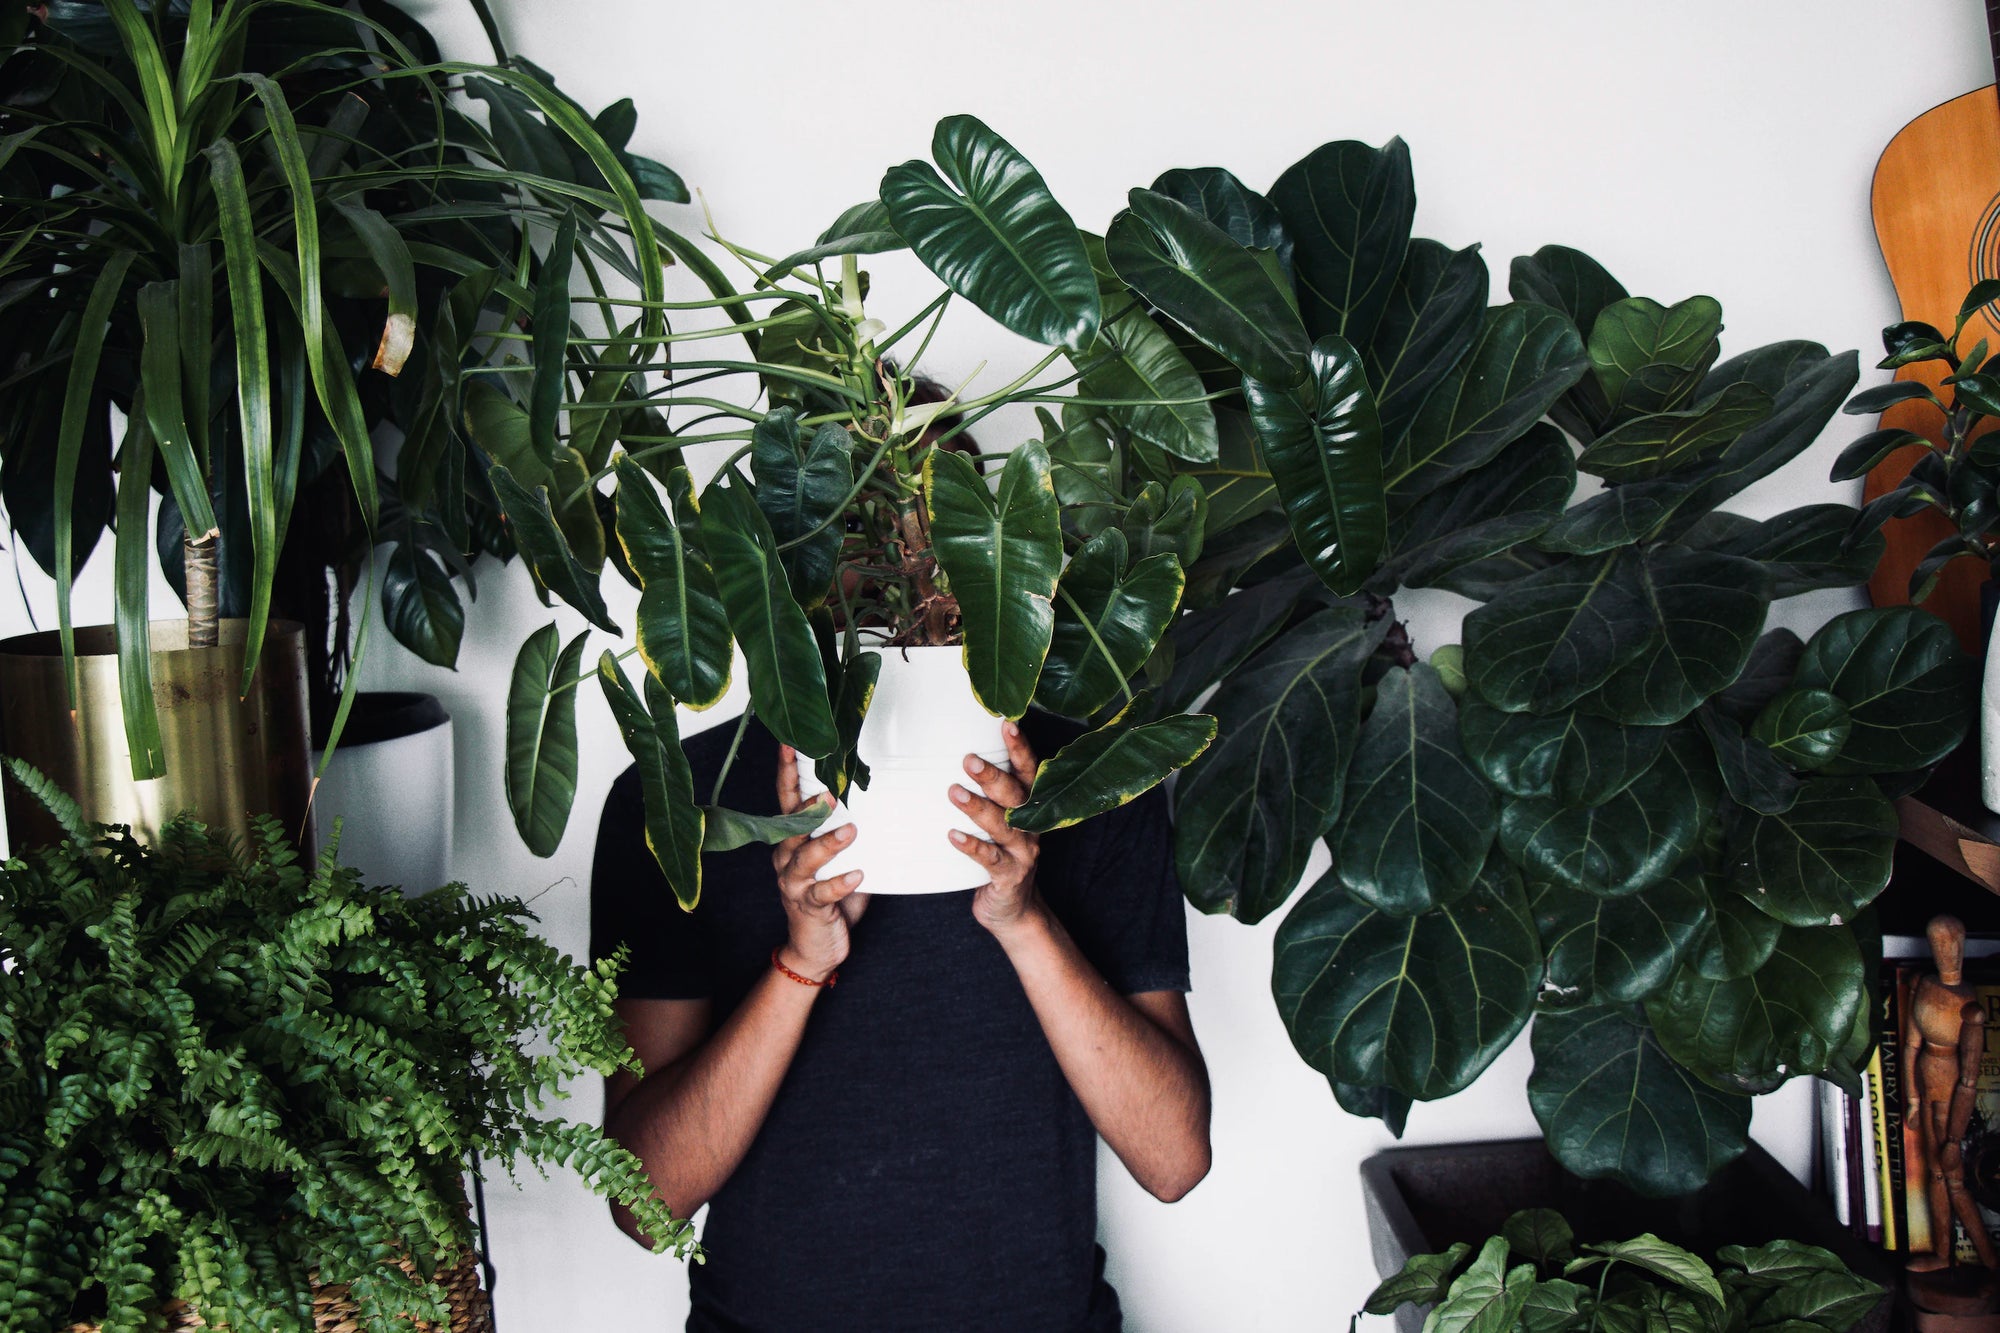 The Therapeutic Potential of Indoor Gardening: Mental Health Benefits for Urban Dwellers